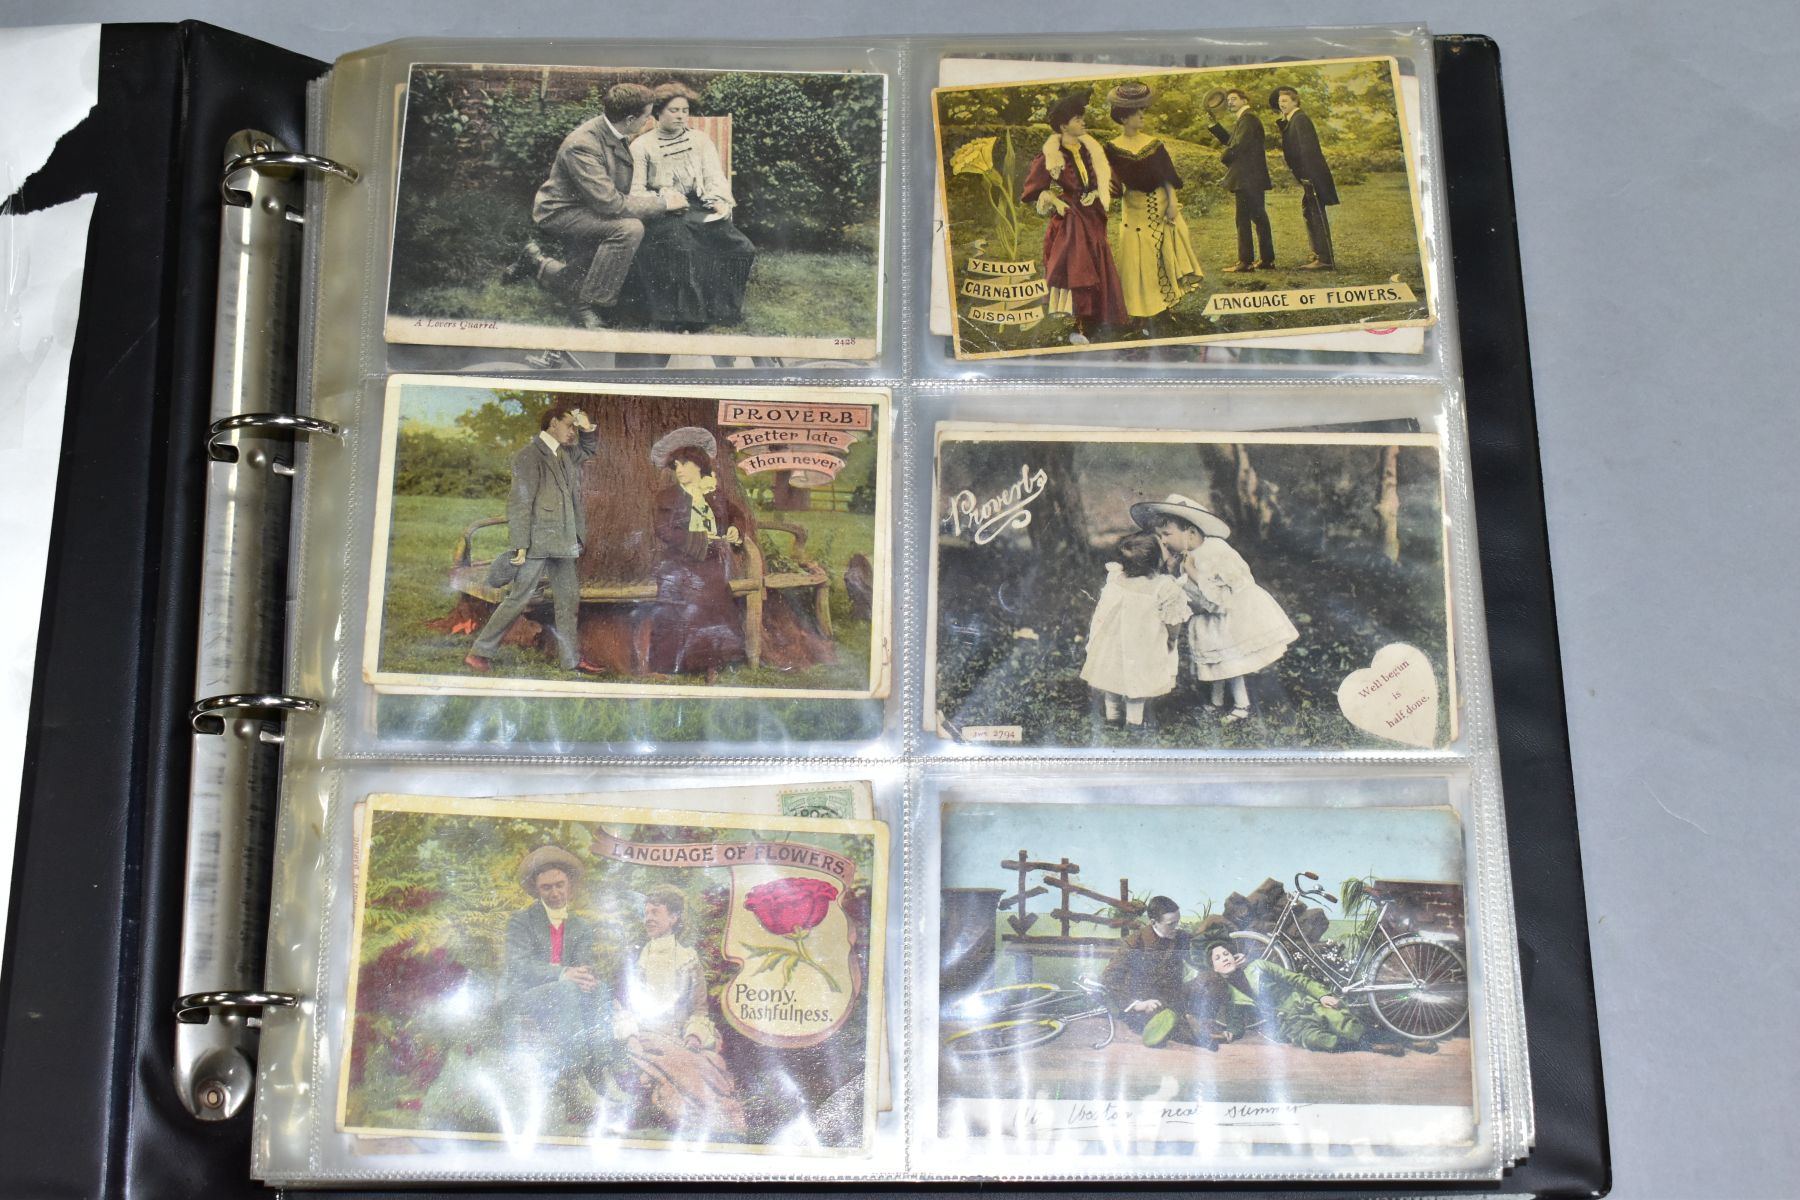 POSTCARDS, approximately 405 postcards in one album, featuring early 20th century examples depicting